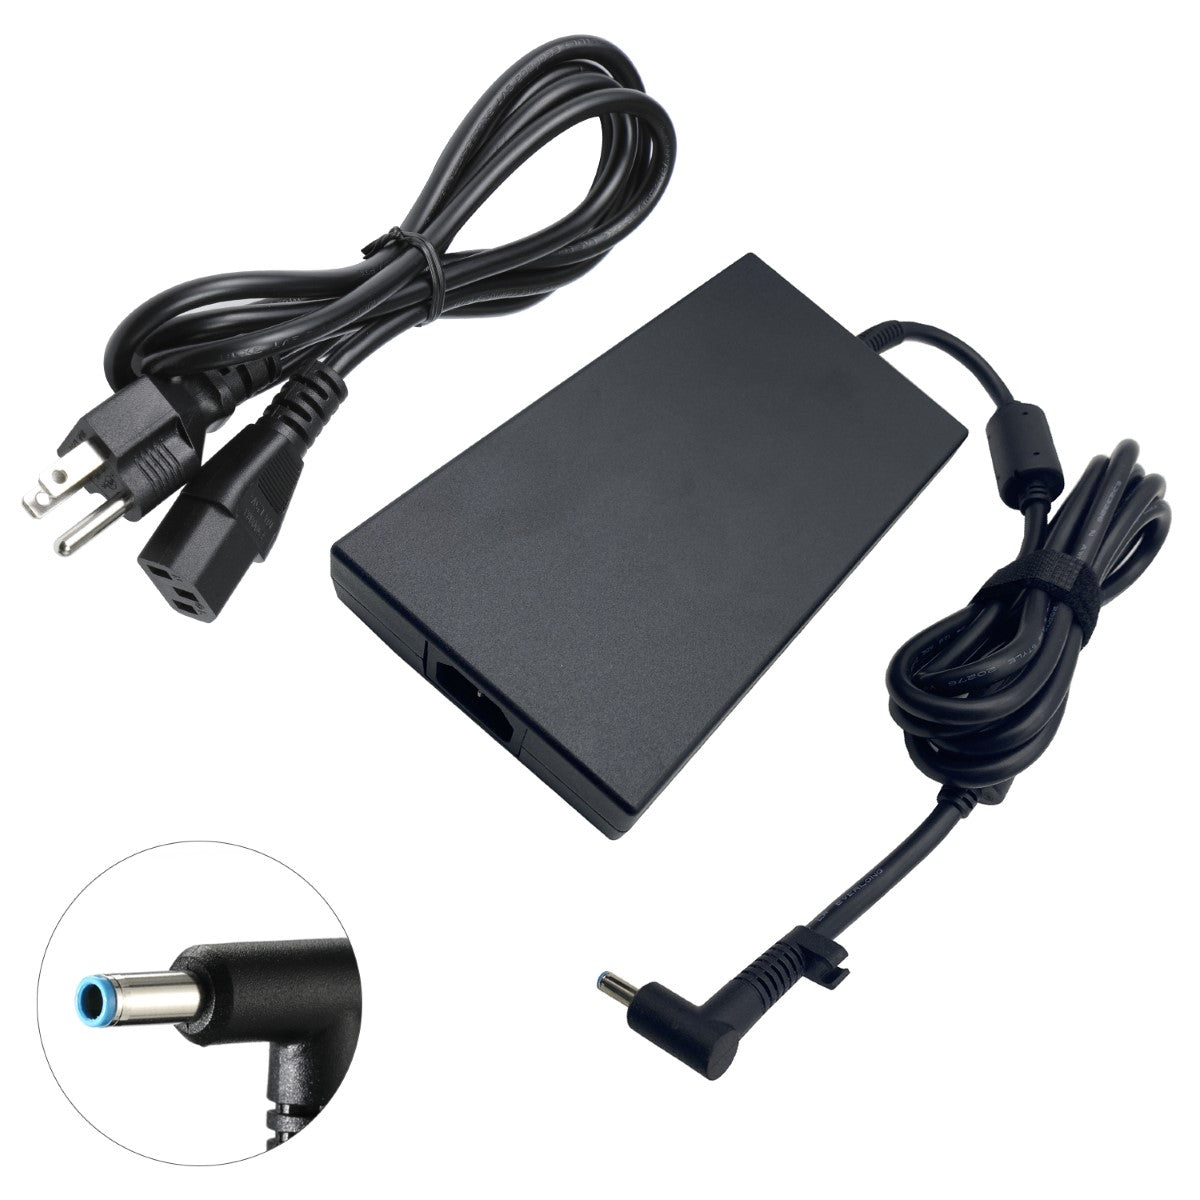 AC Adapter for HP Victus 15-fa0032dx Laptop